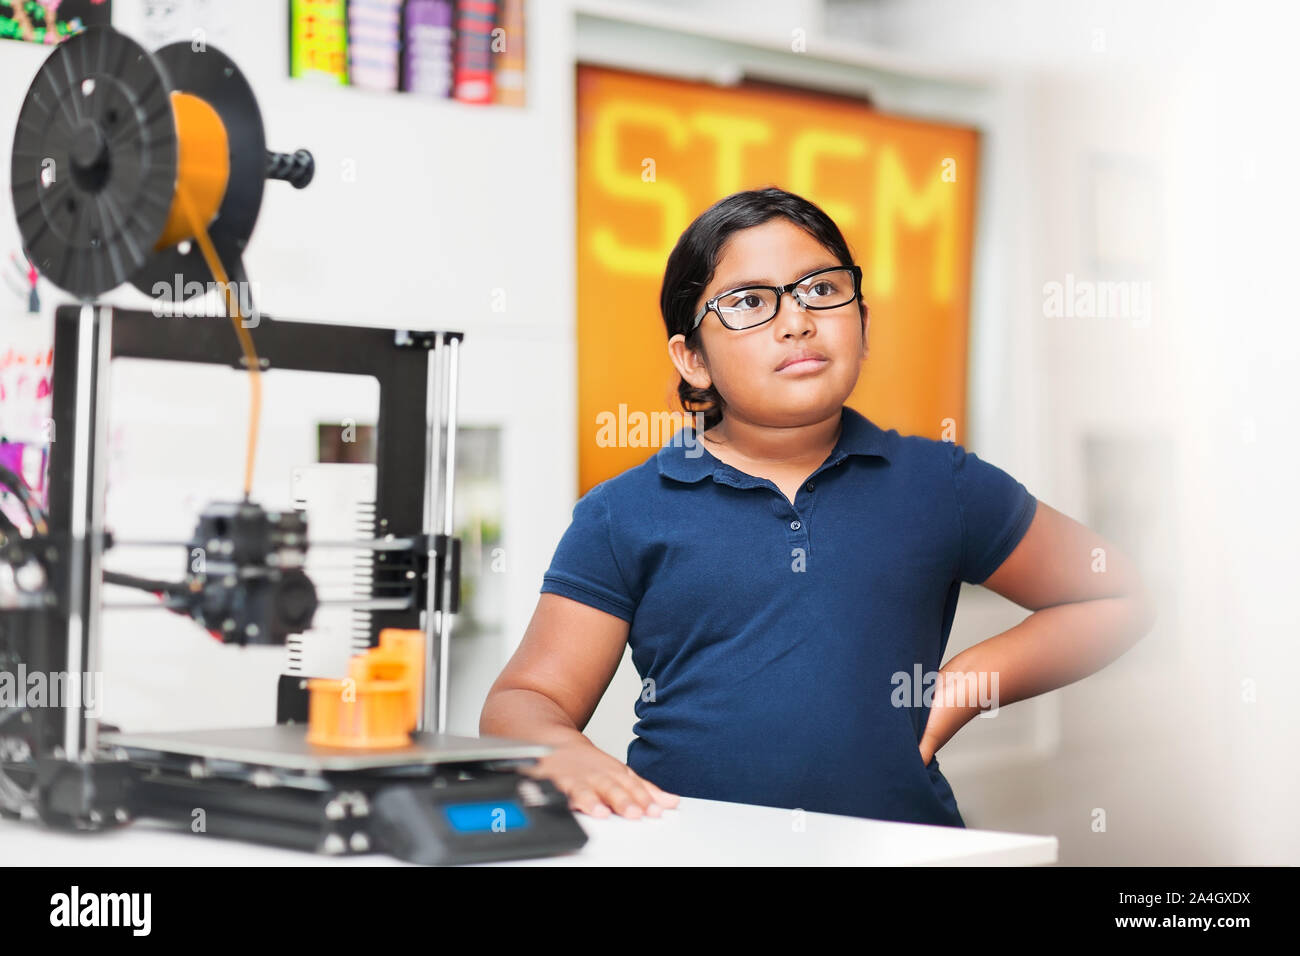 Young girl wearing glasses in a stem class who is representing minority students learning 3D printing skills. Stock Photo